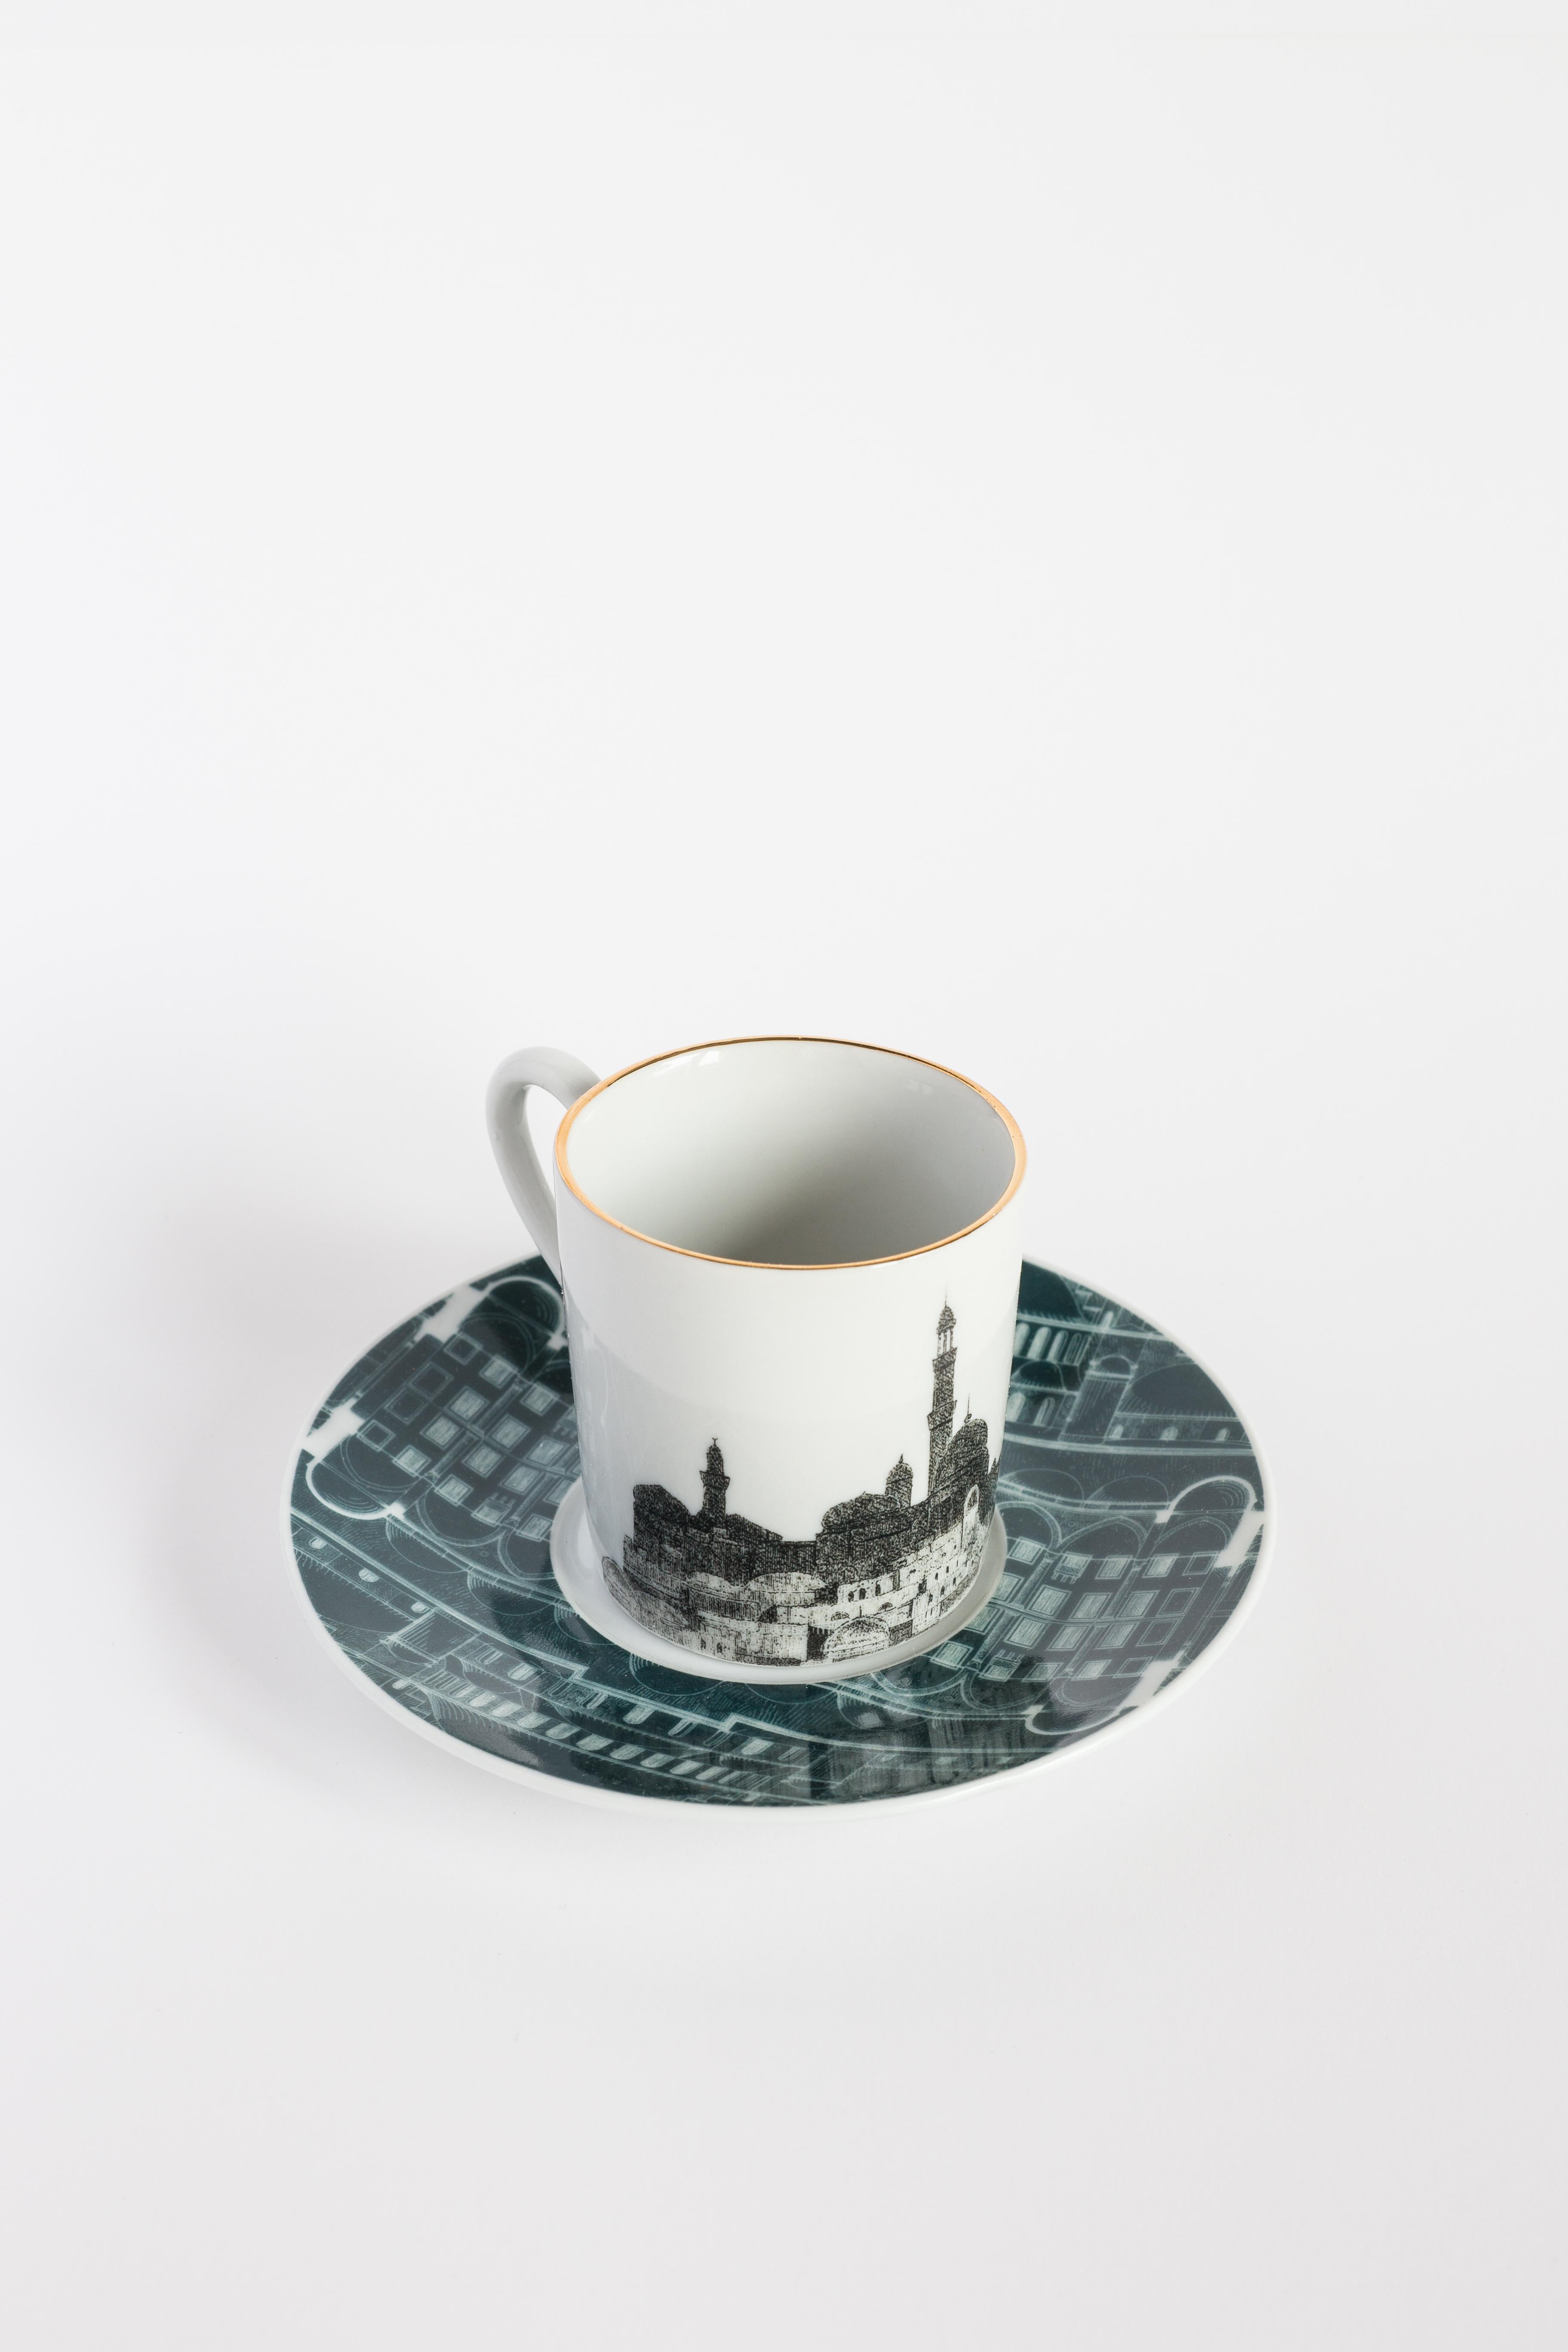 In Lebanon collection a different landscape depicts the local coasts, ruins, and architecture in black and white, with a sophisticated rim decoration that showcases blueprints of traditional buildings.
Coffee set with 6 coffee cups and plates.